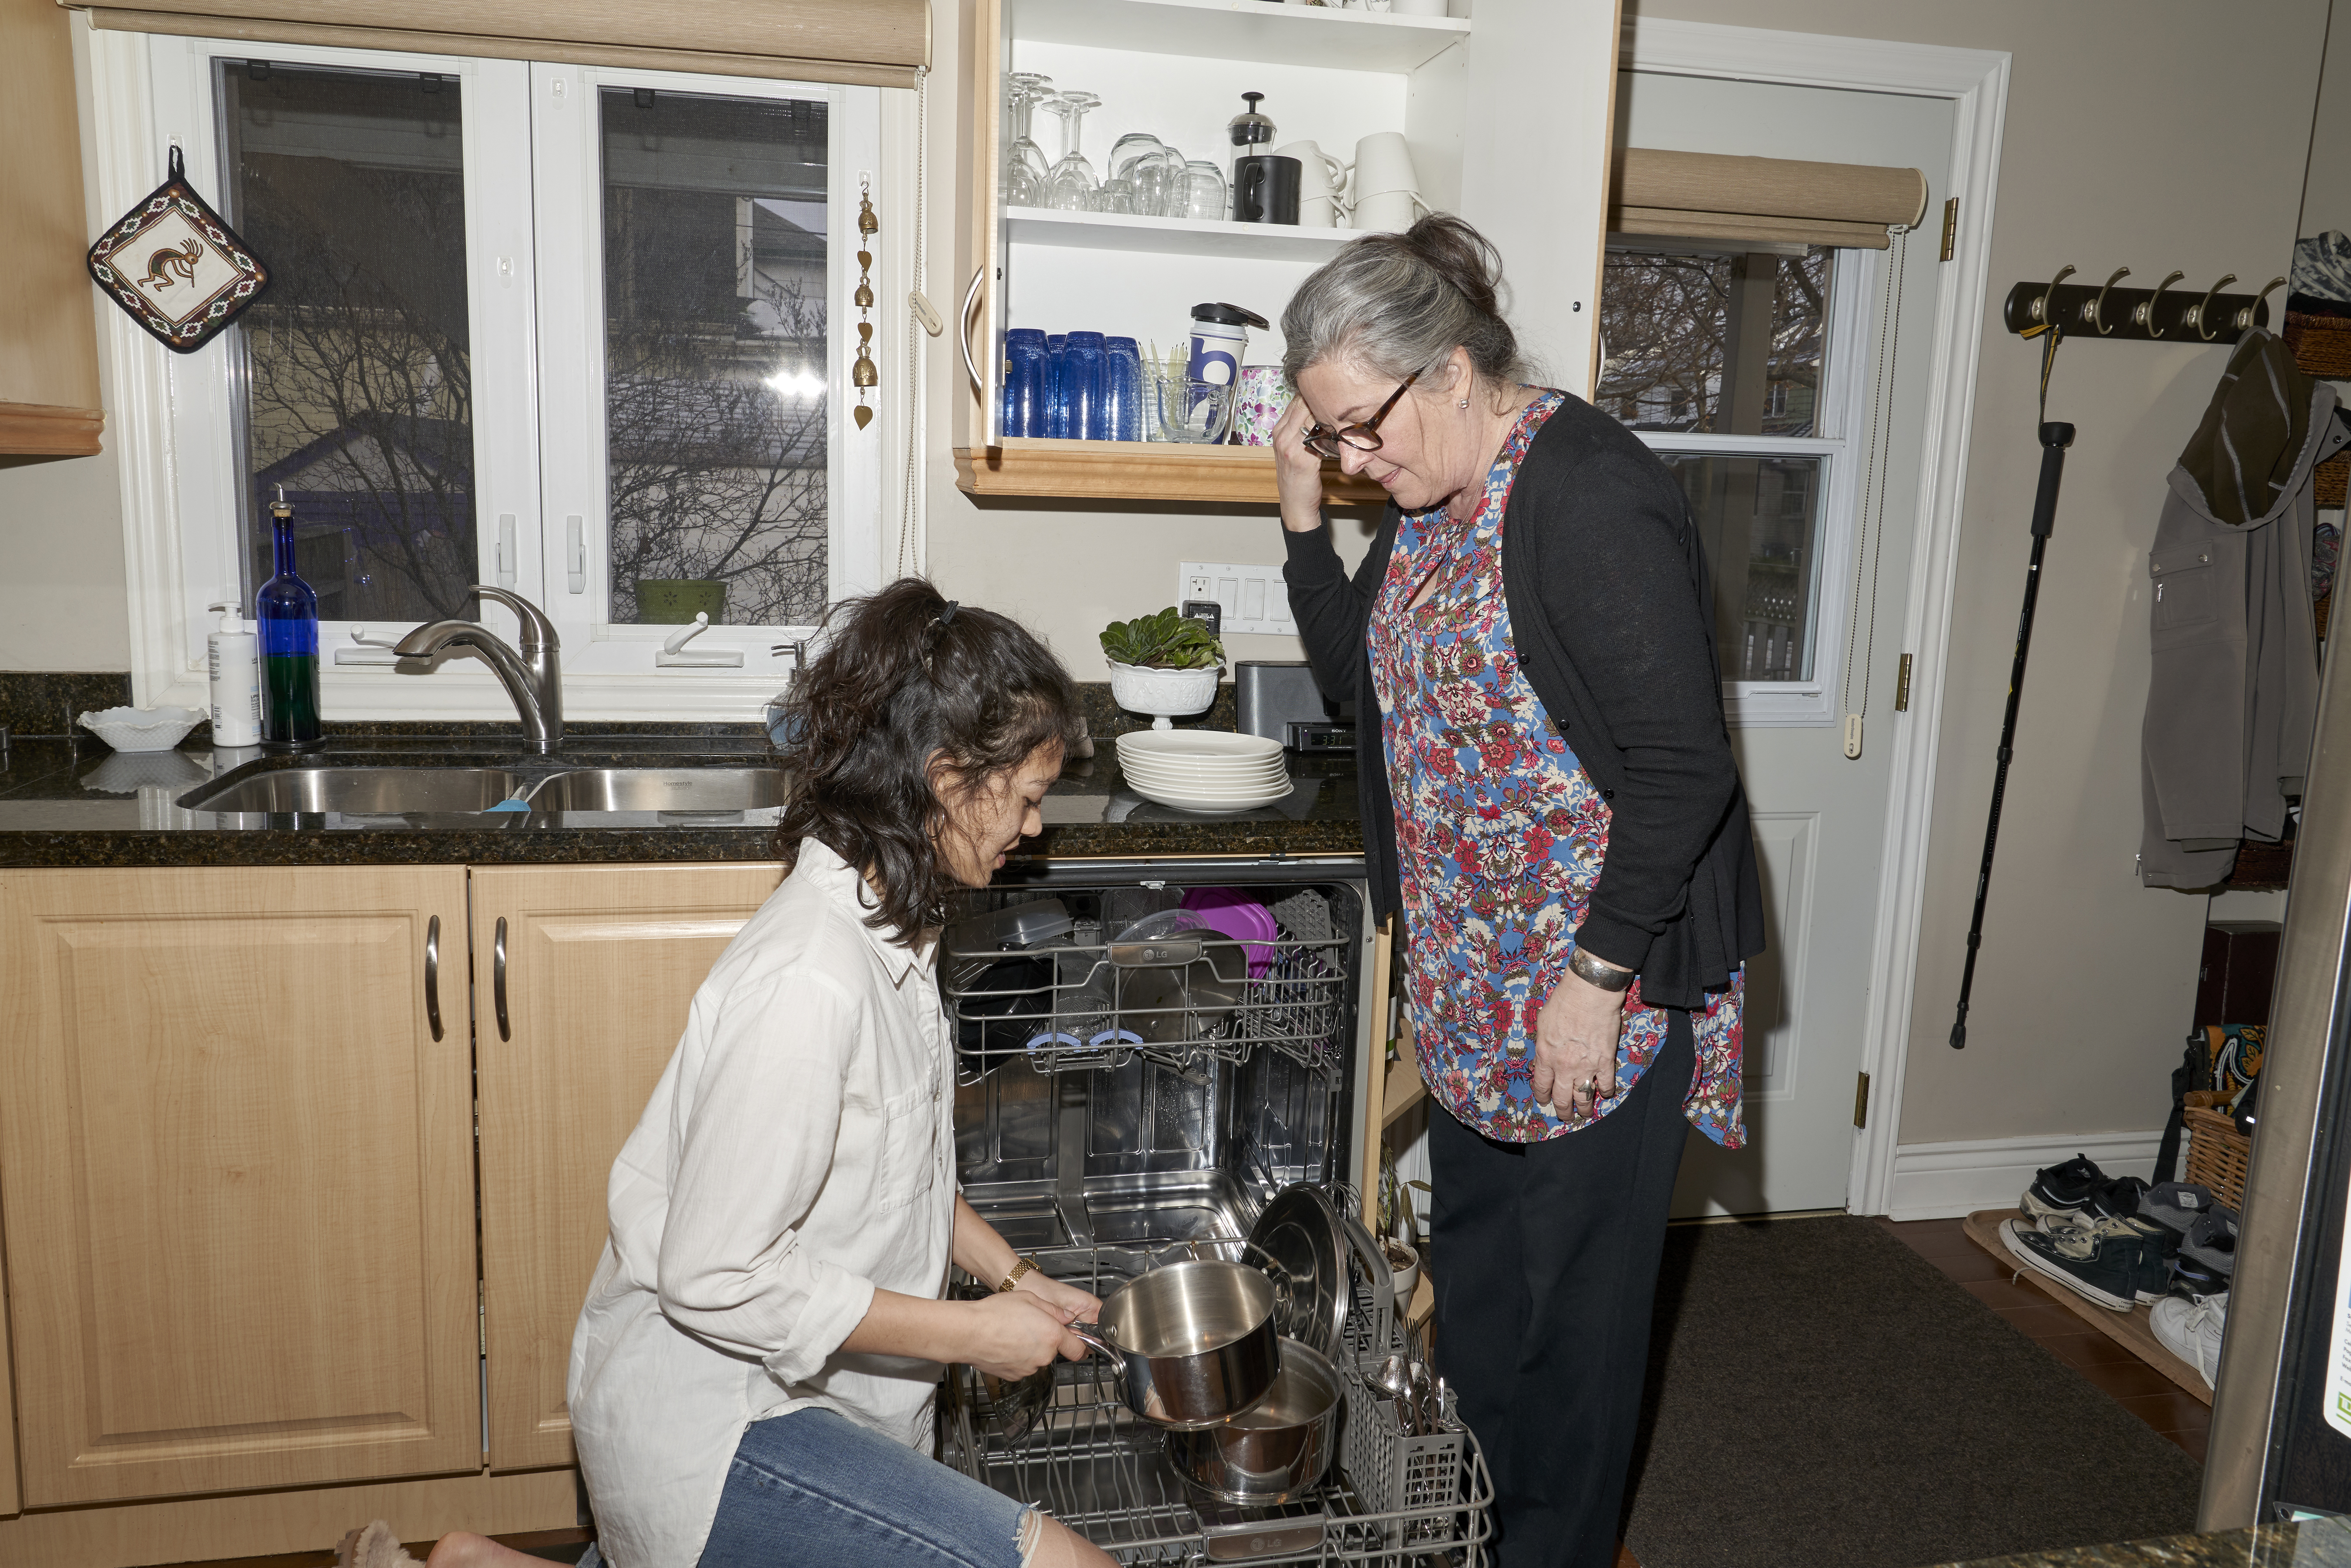 18-year old U of T student Zoe Butcher helps Catherine Finlayson, 61 empty the dishwasher. The two roommates are part of the Toronto HomeShare Pilot Project where university students are paired with senior-citizens who have a spare room in their homes. Students are expected to help out around the house doing chores and light housework in return for subsidized rent